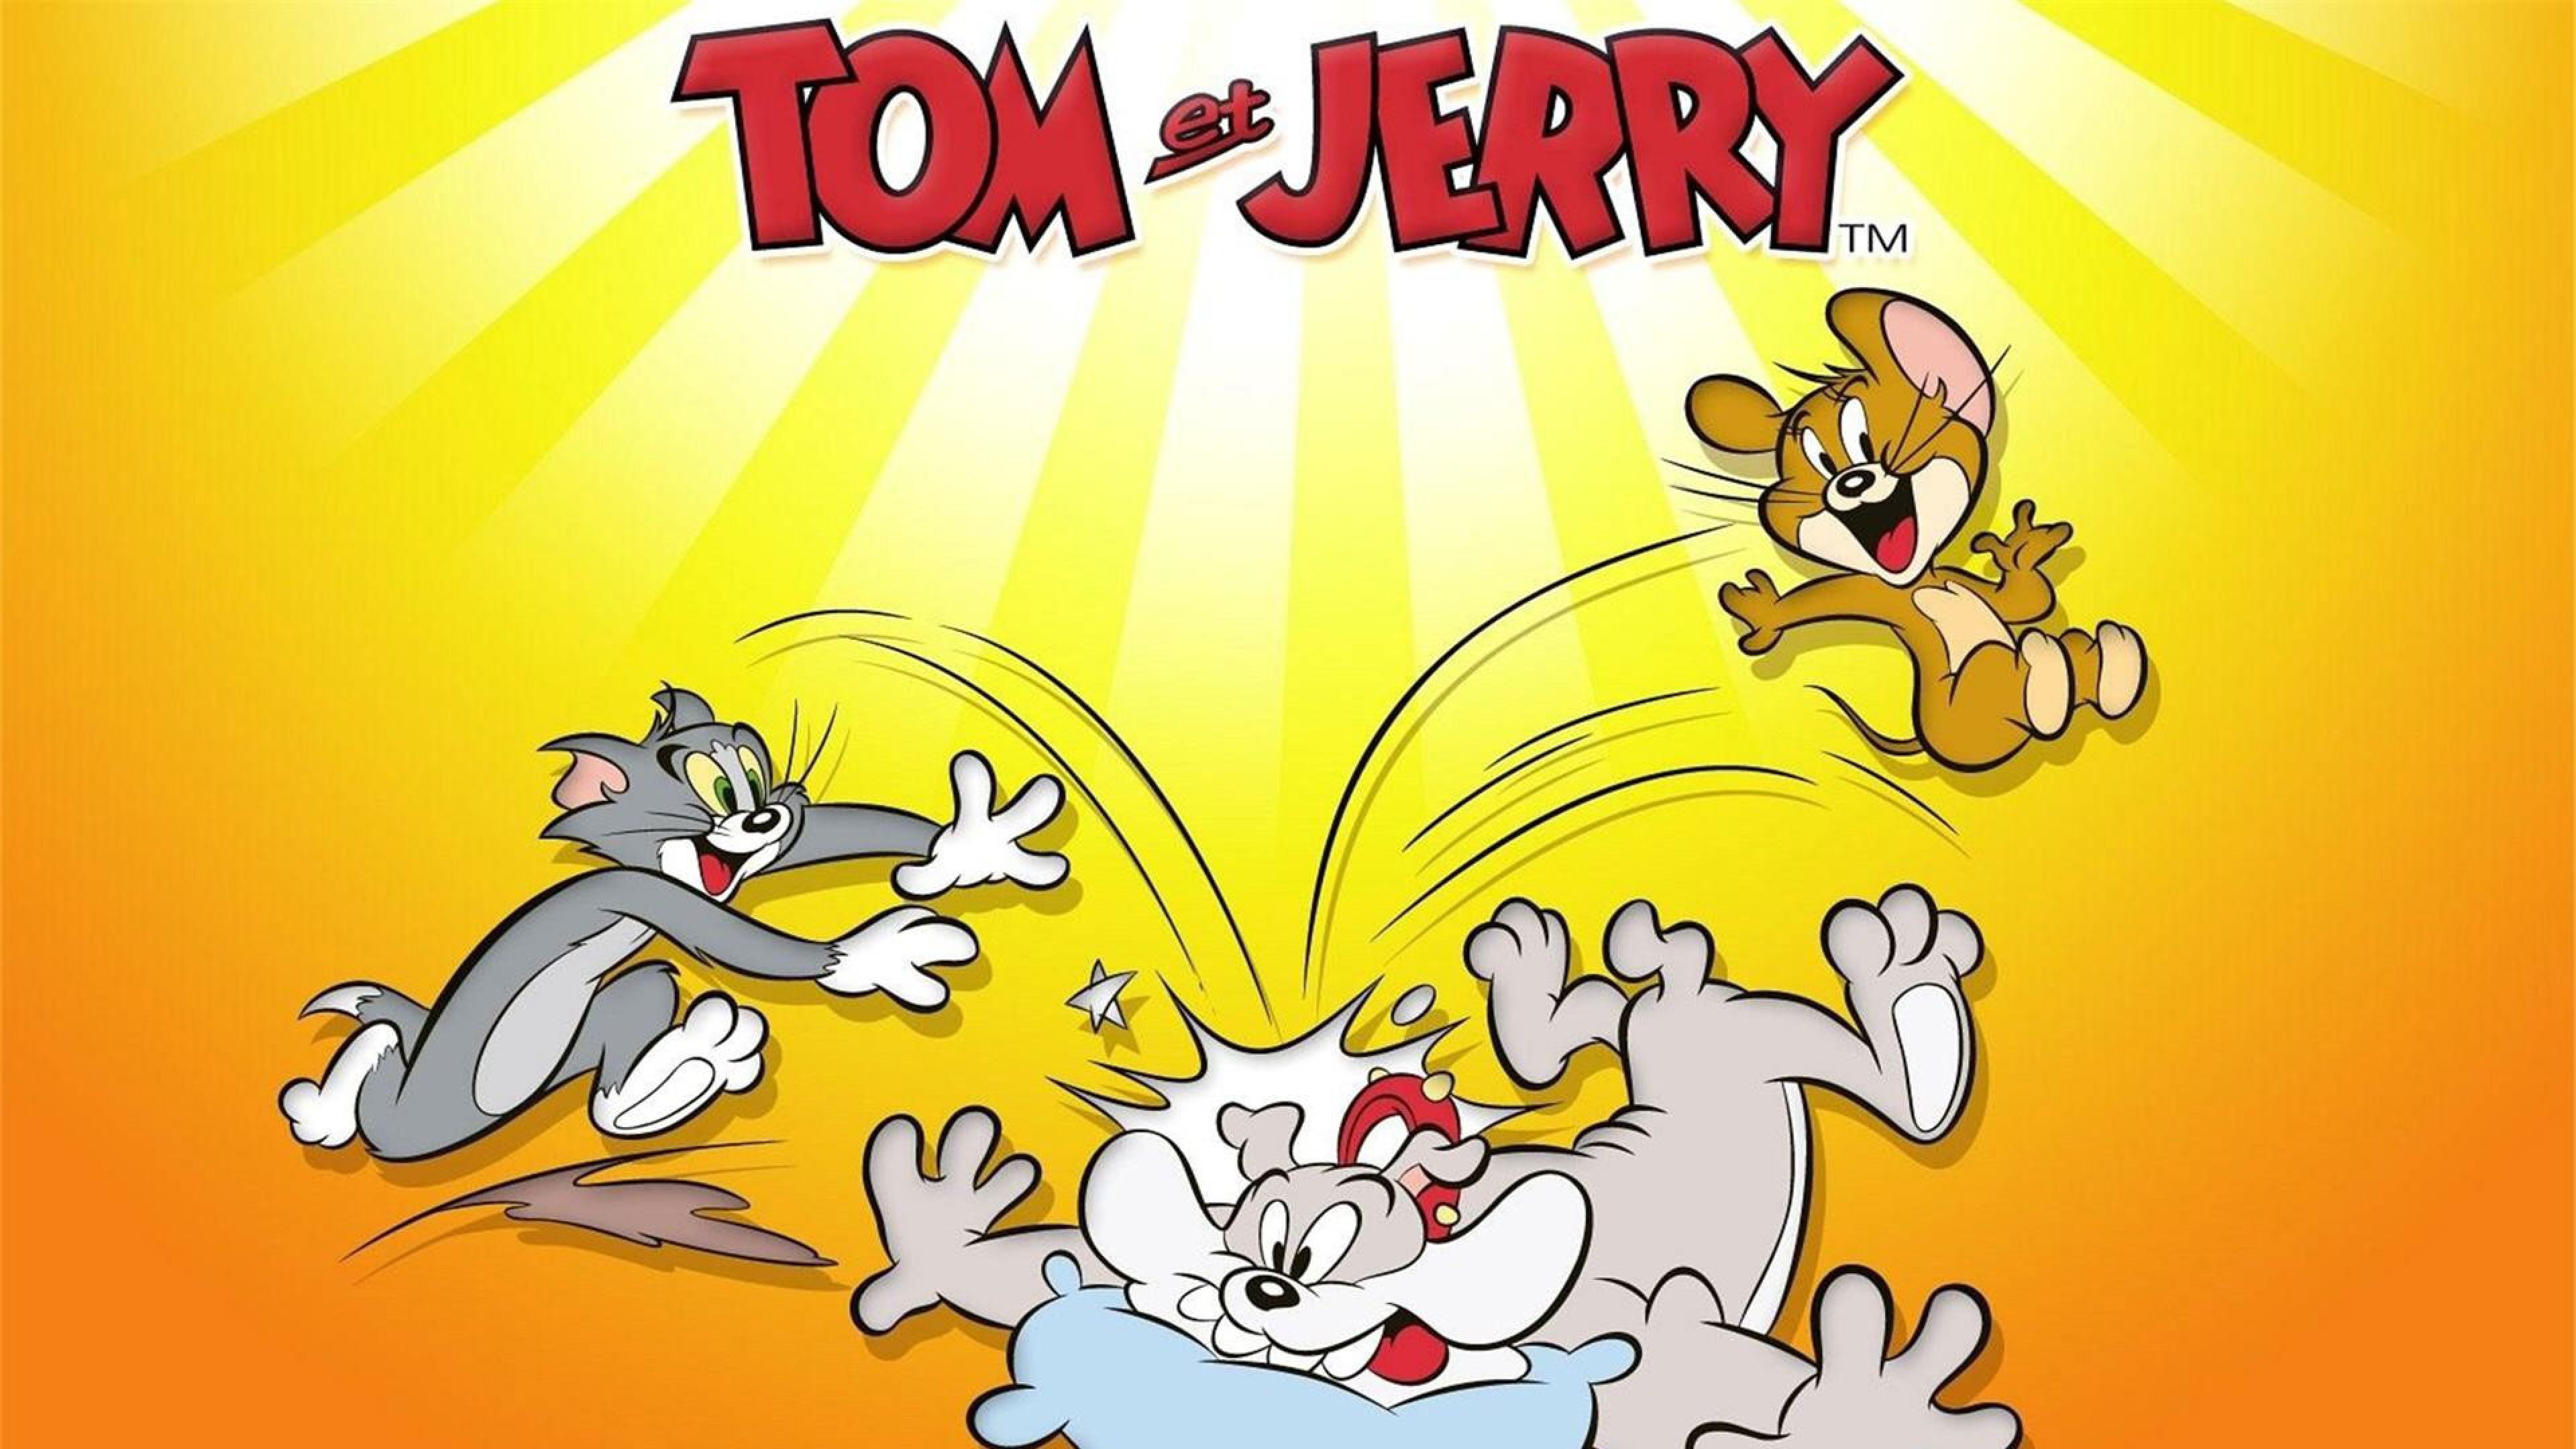 3840x2160 Ultra HD 4K Tom and jerry Wallpapers HD, Desktop Backgrounds